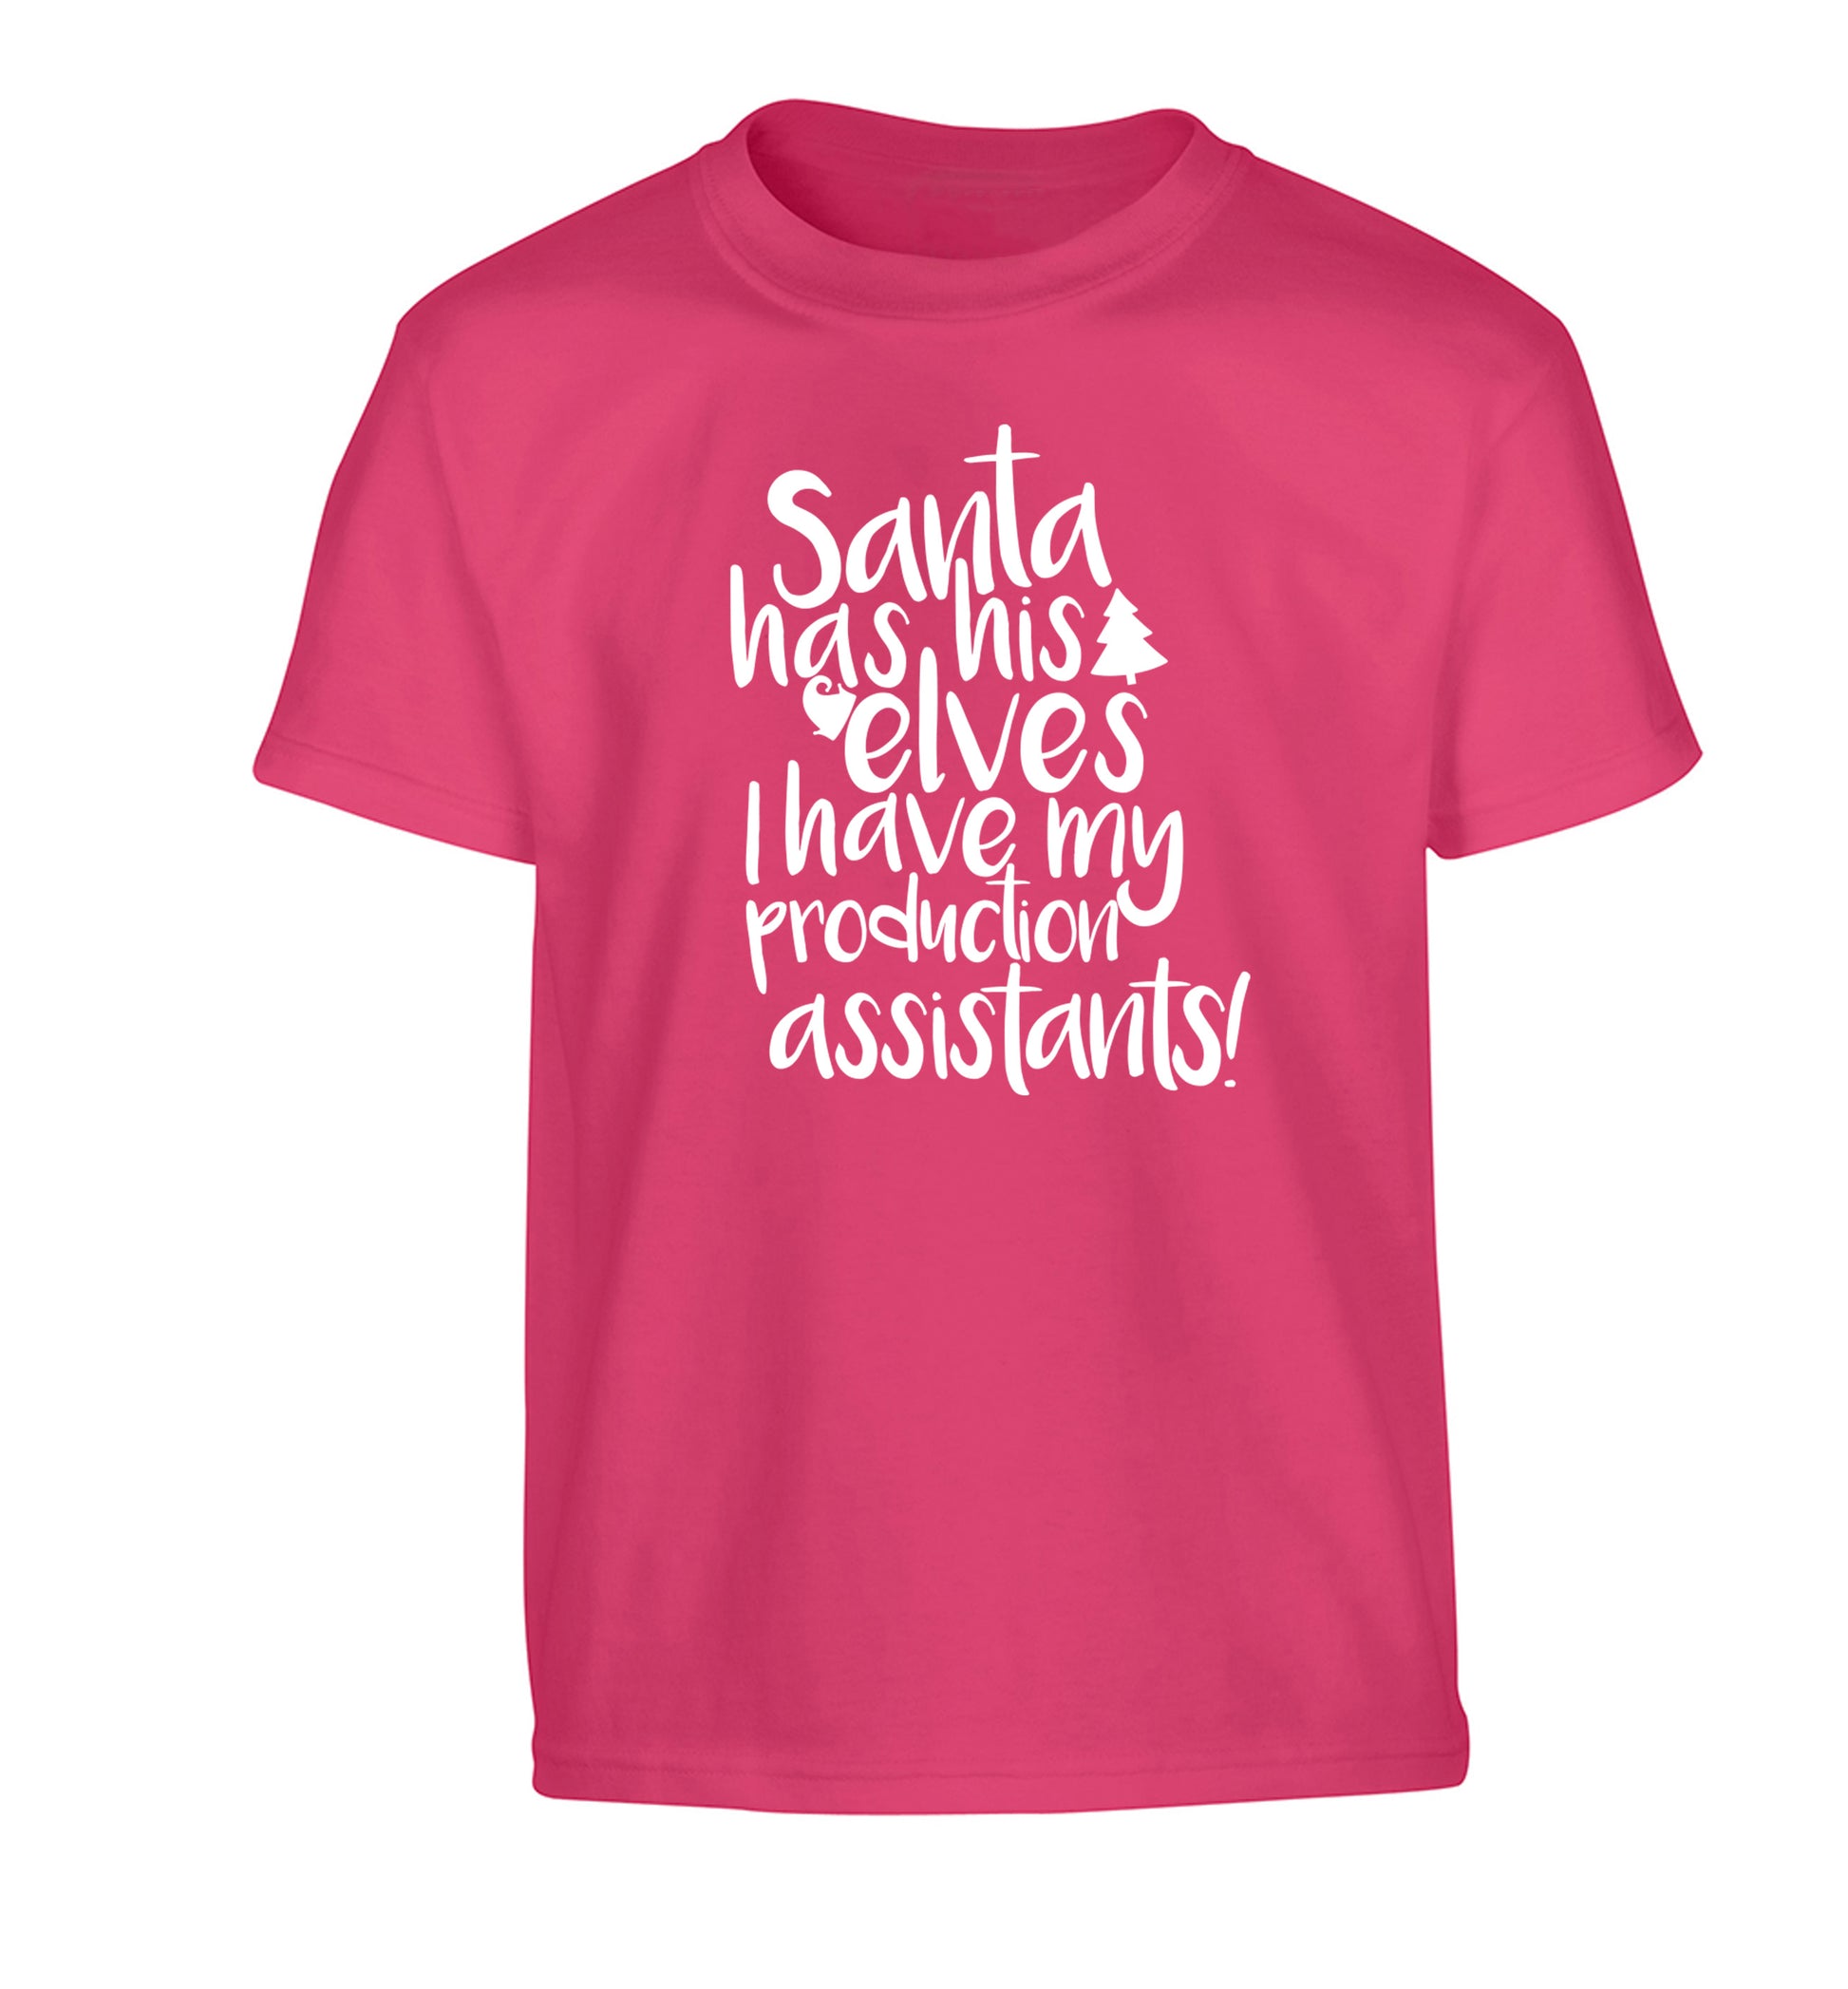 Santa has his elves I have my production assistants Children's pink Tshirt 12-14 Years